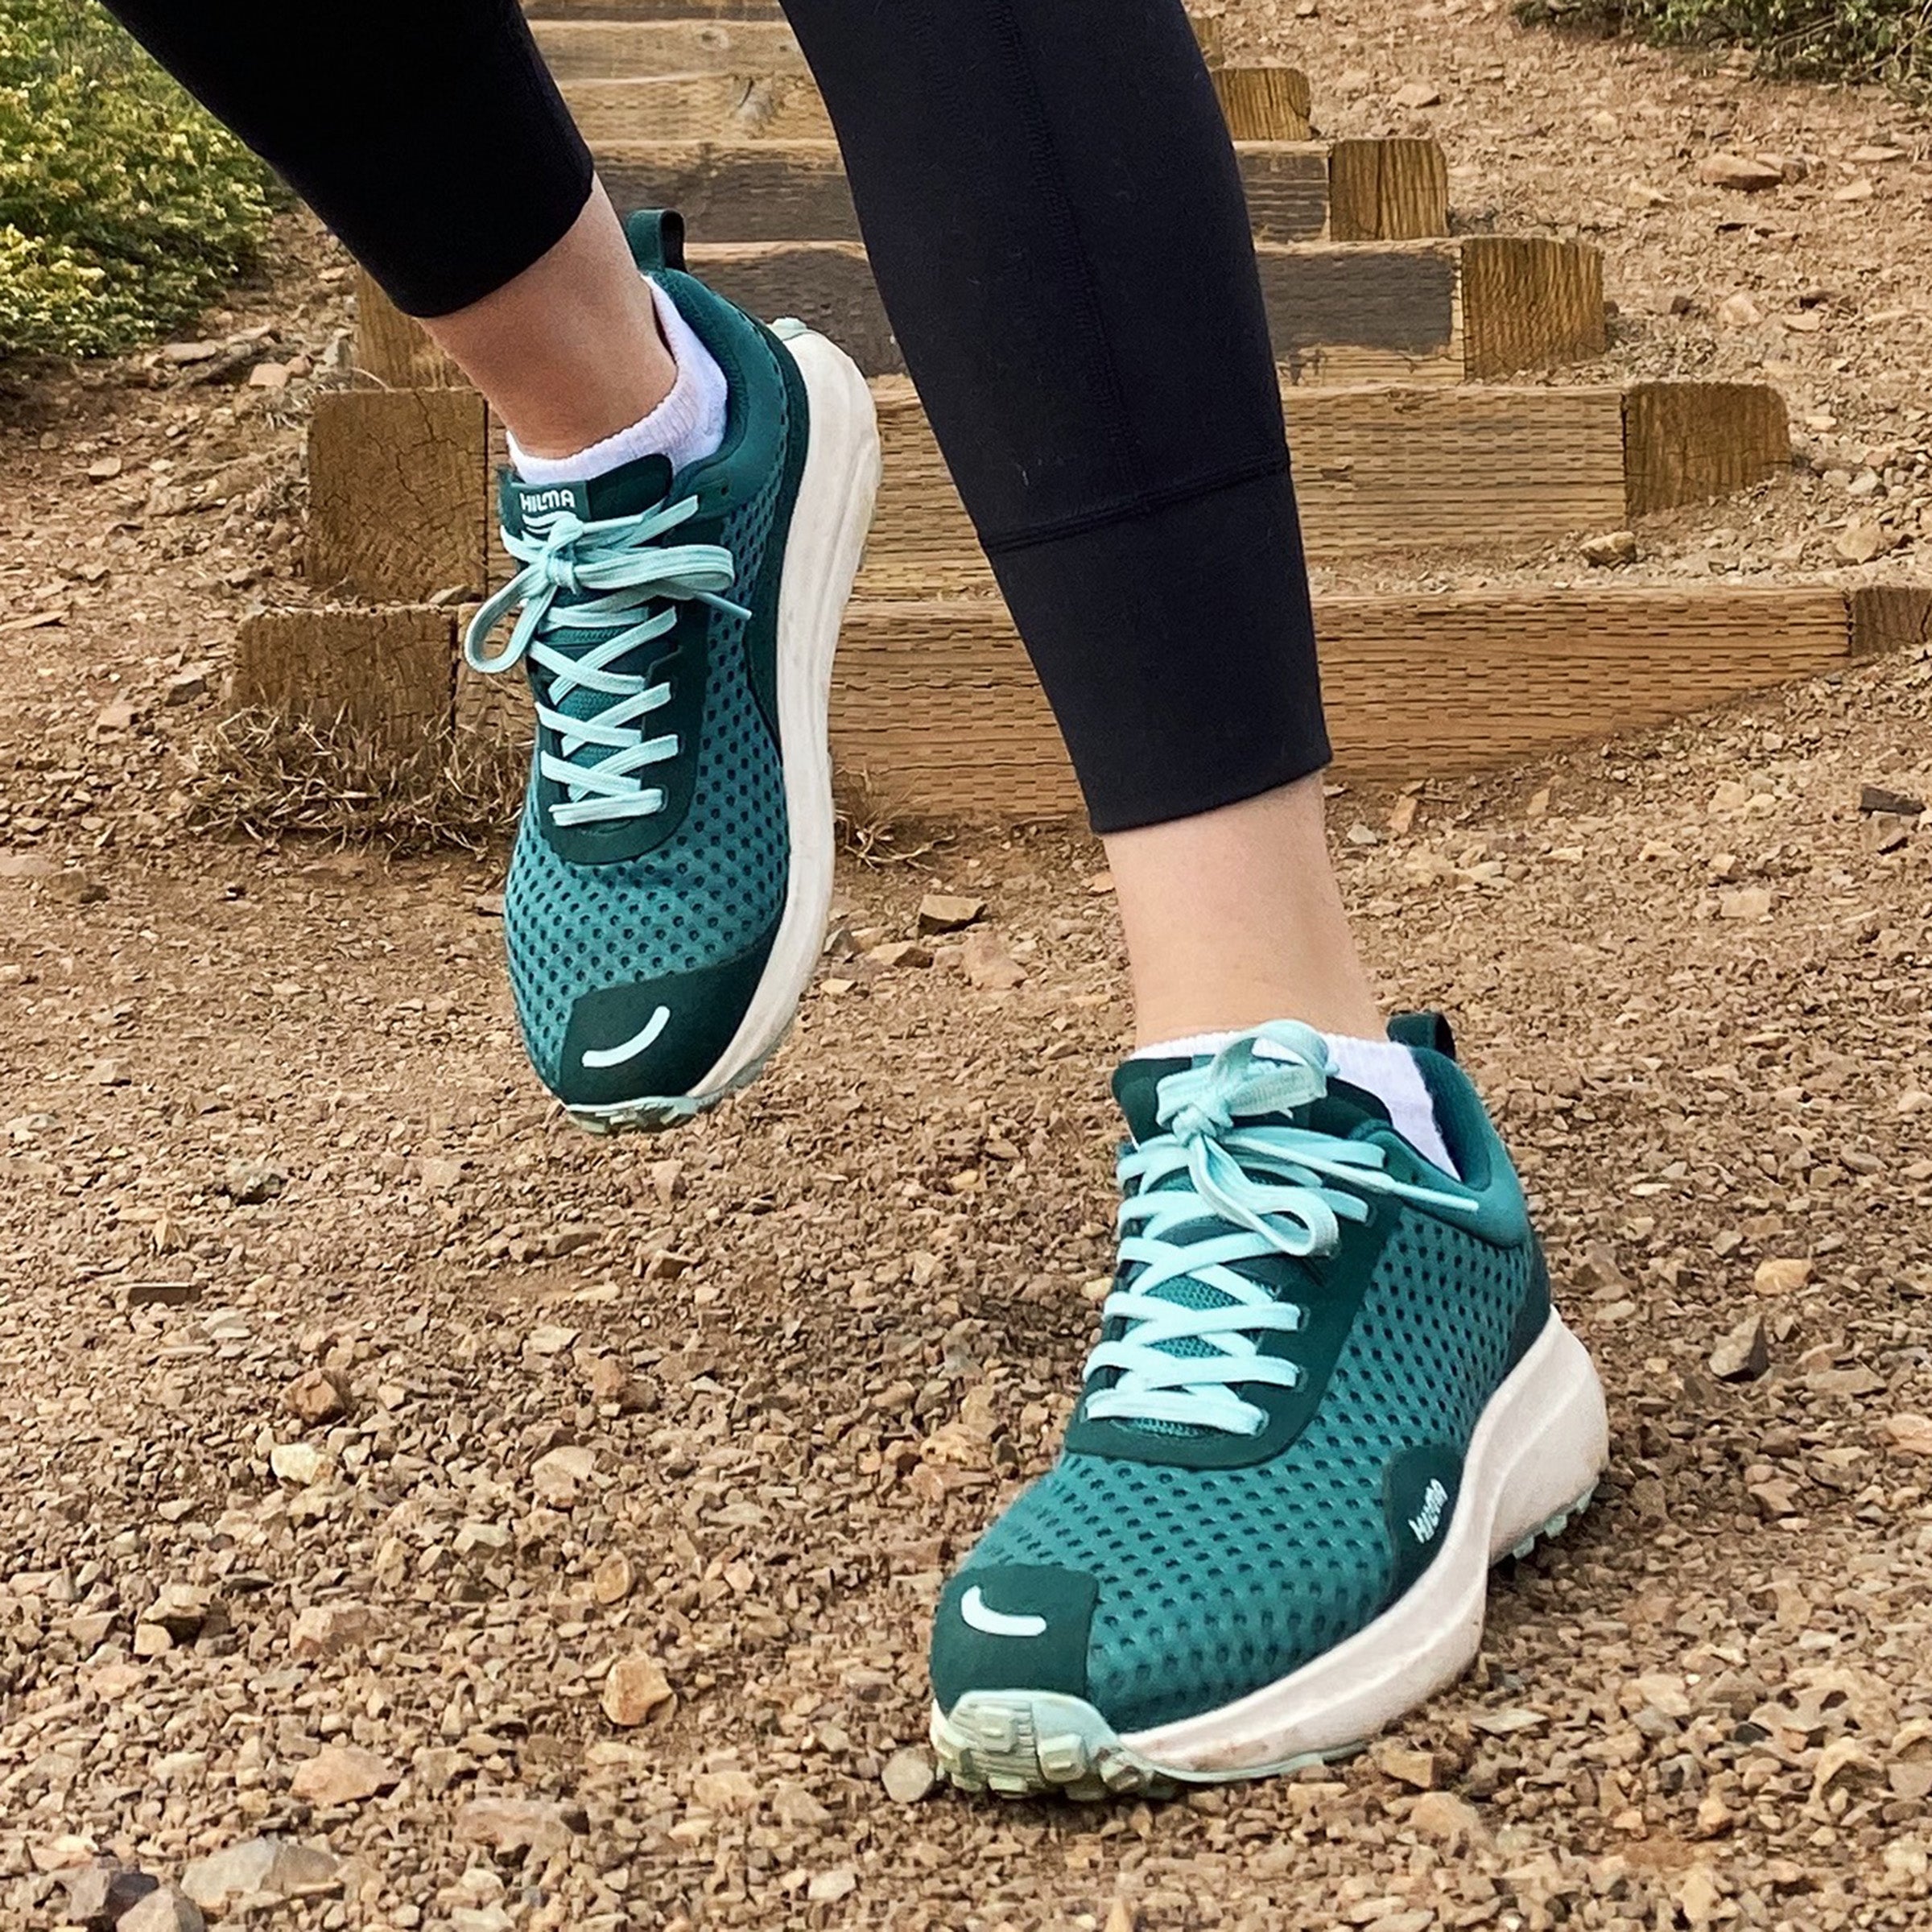 New Running Shoe Brand Hilma to Offer 45(!) Sizes for Women